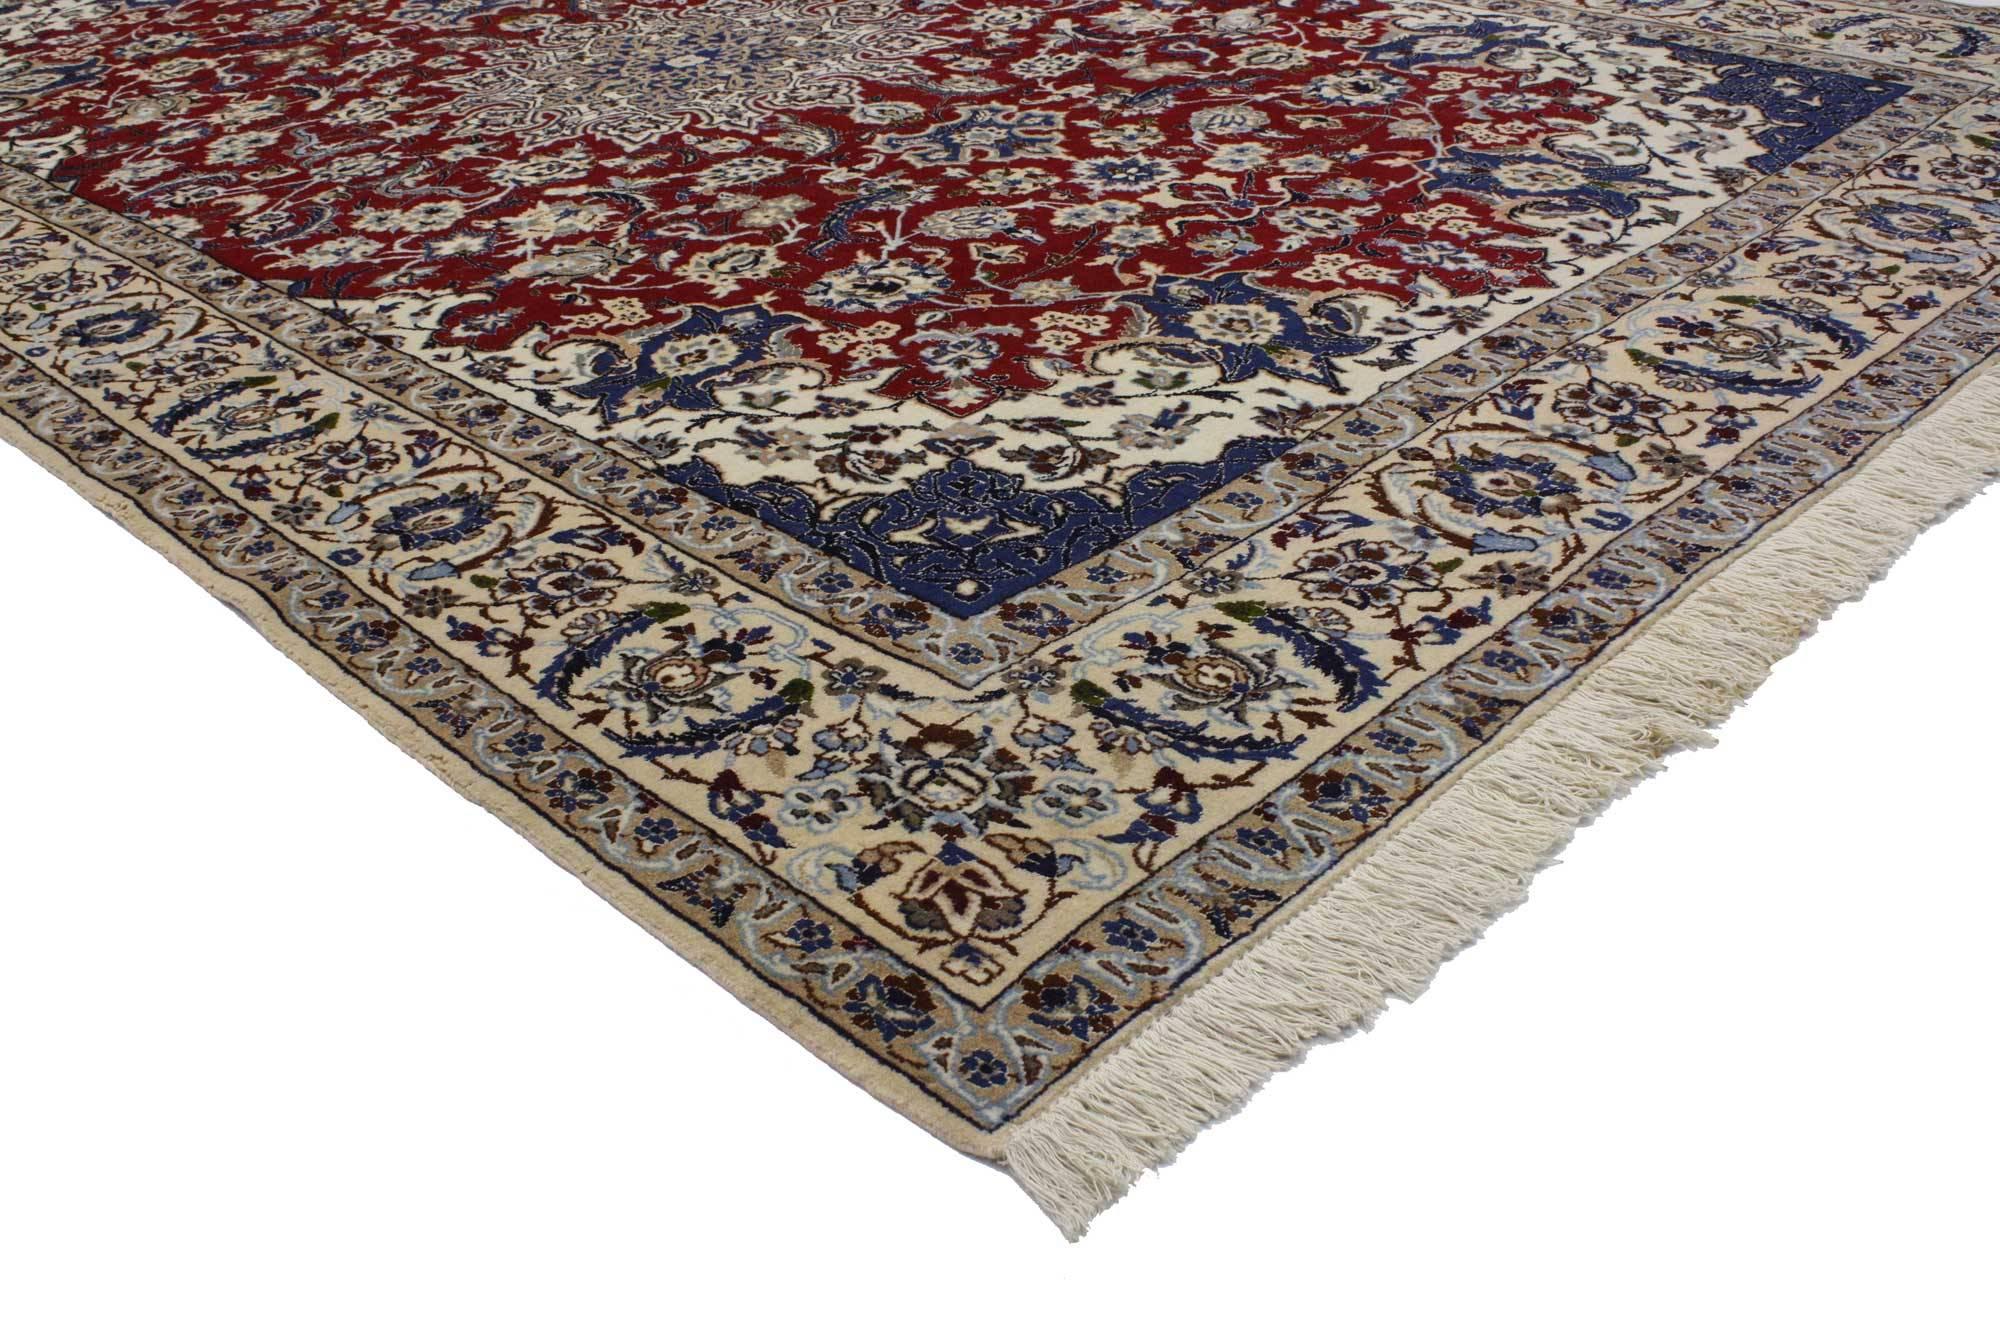 Tabriz Vintage Persian Nain Rug with Federal Colonial Style